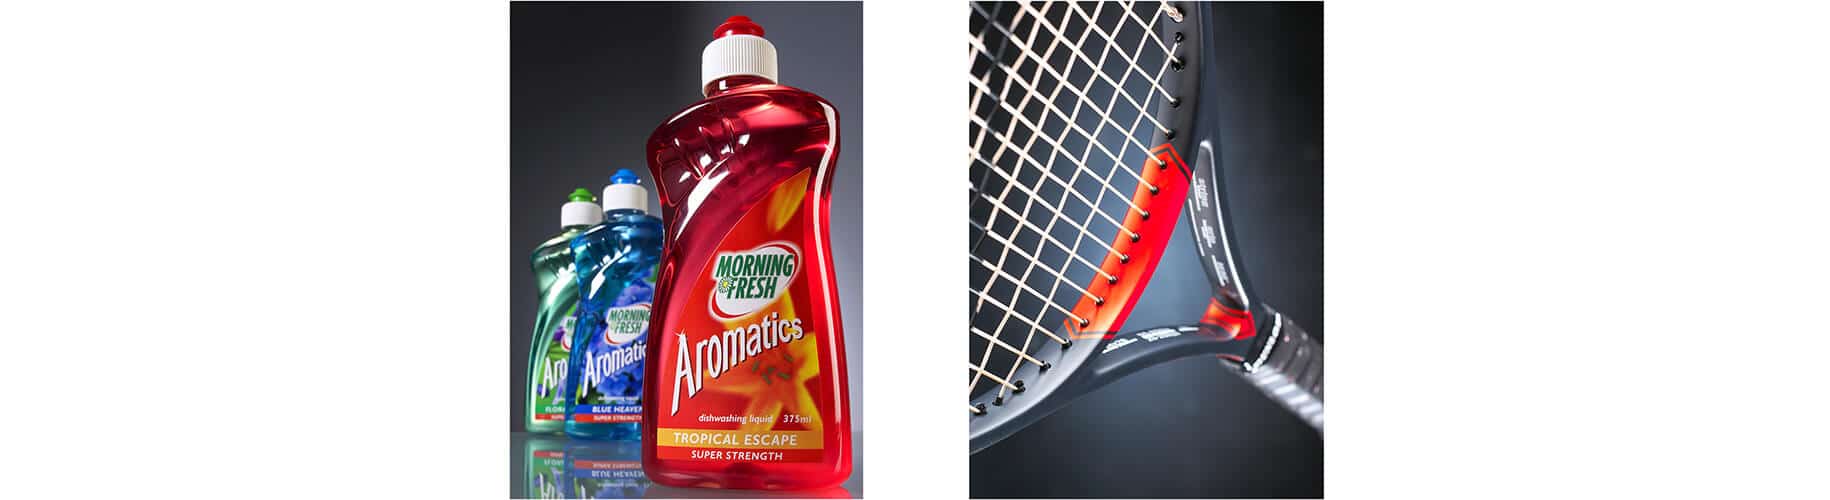 bottles of liquid soaps and a tennis racket